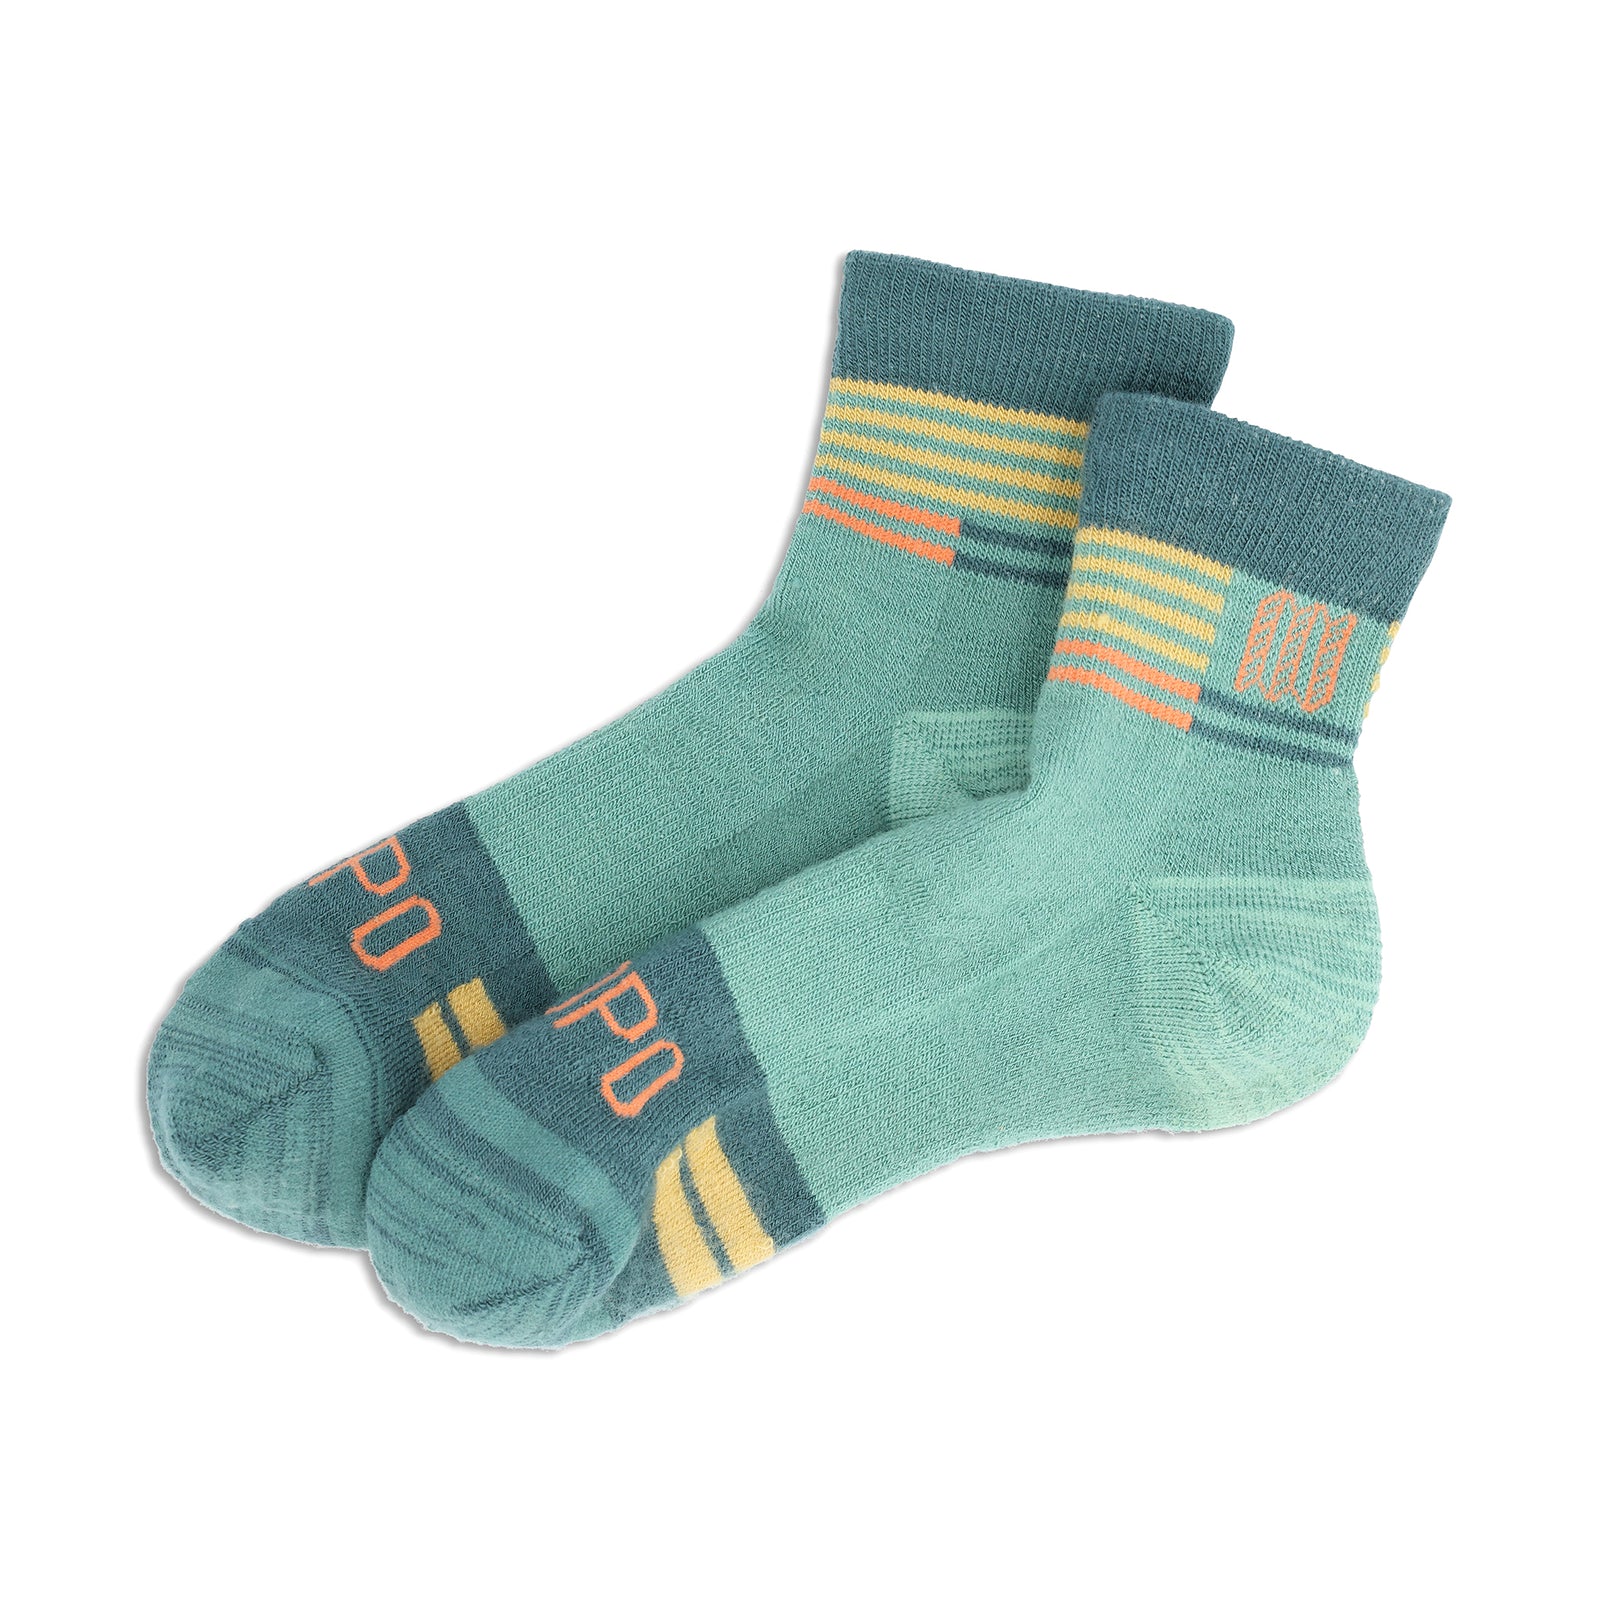 Front View of Topo Designs Mountain Trail Sock in "Geode Green / Sea Pine"